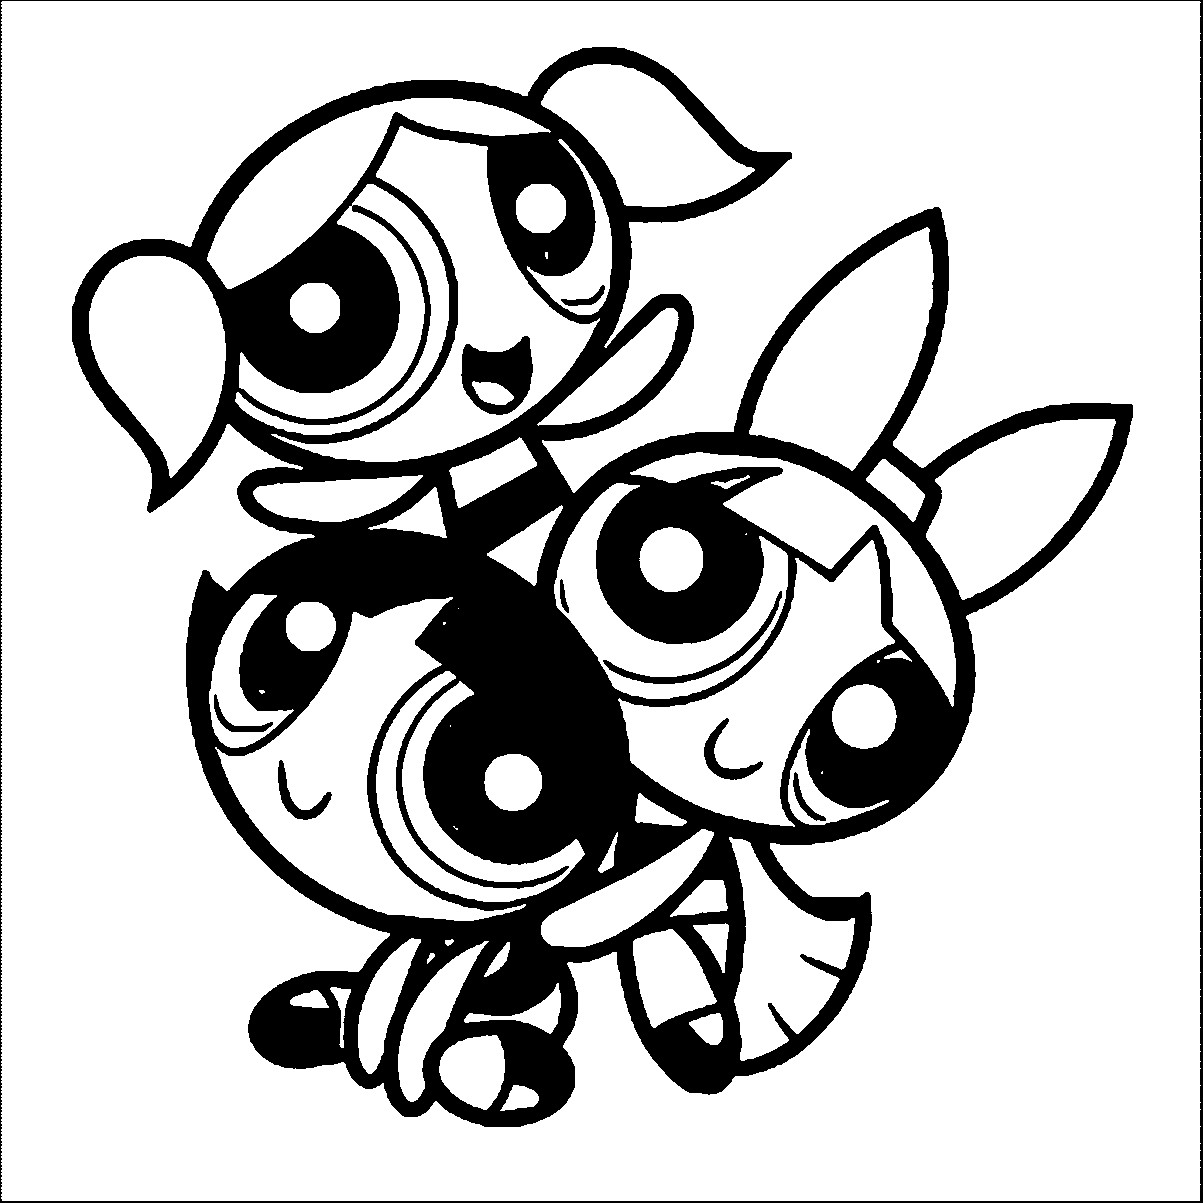 Powderpuff Girls Coloring Pages
 Powerpuff Girls Coloring Pages